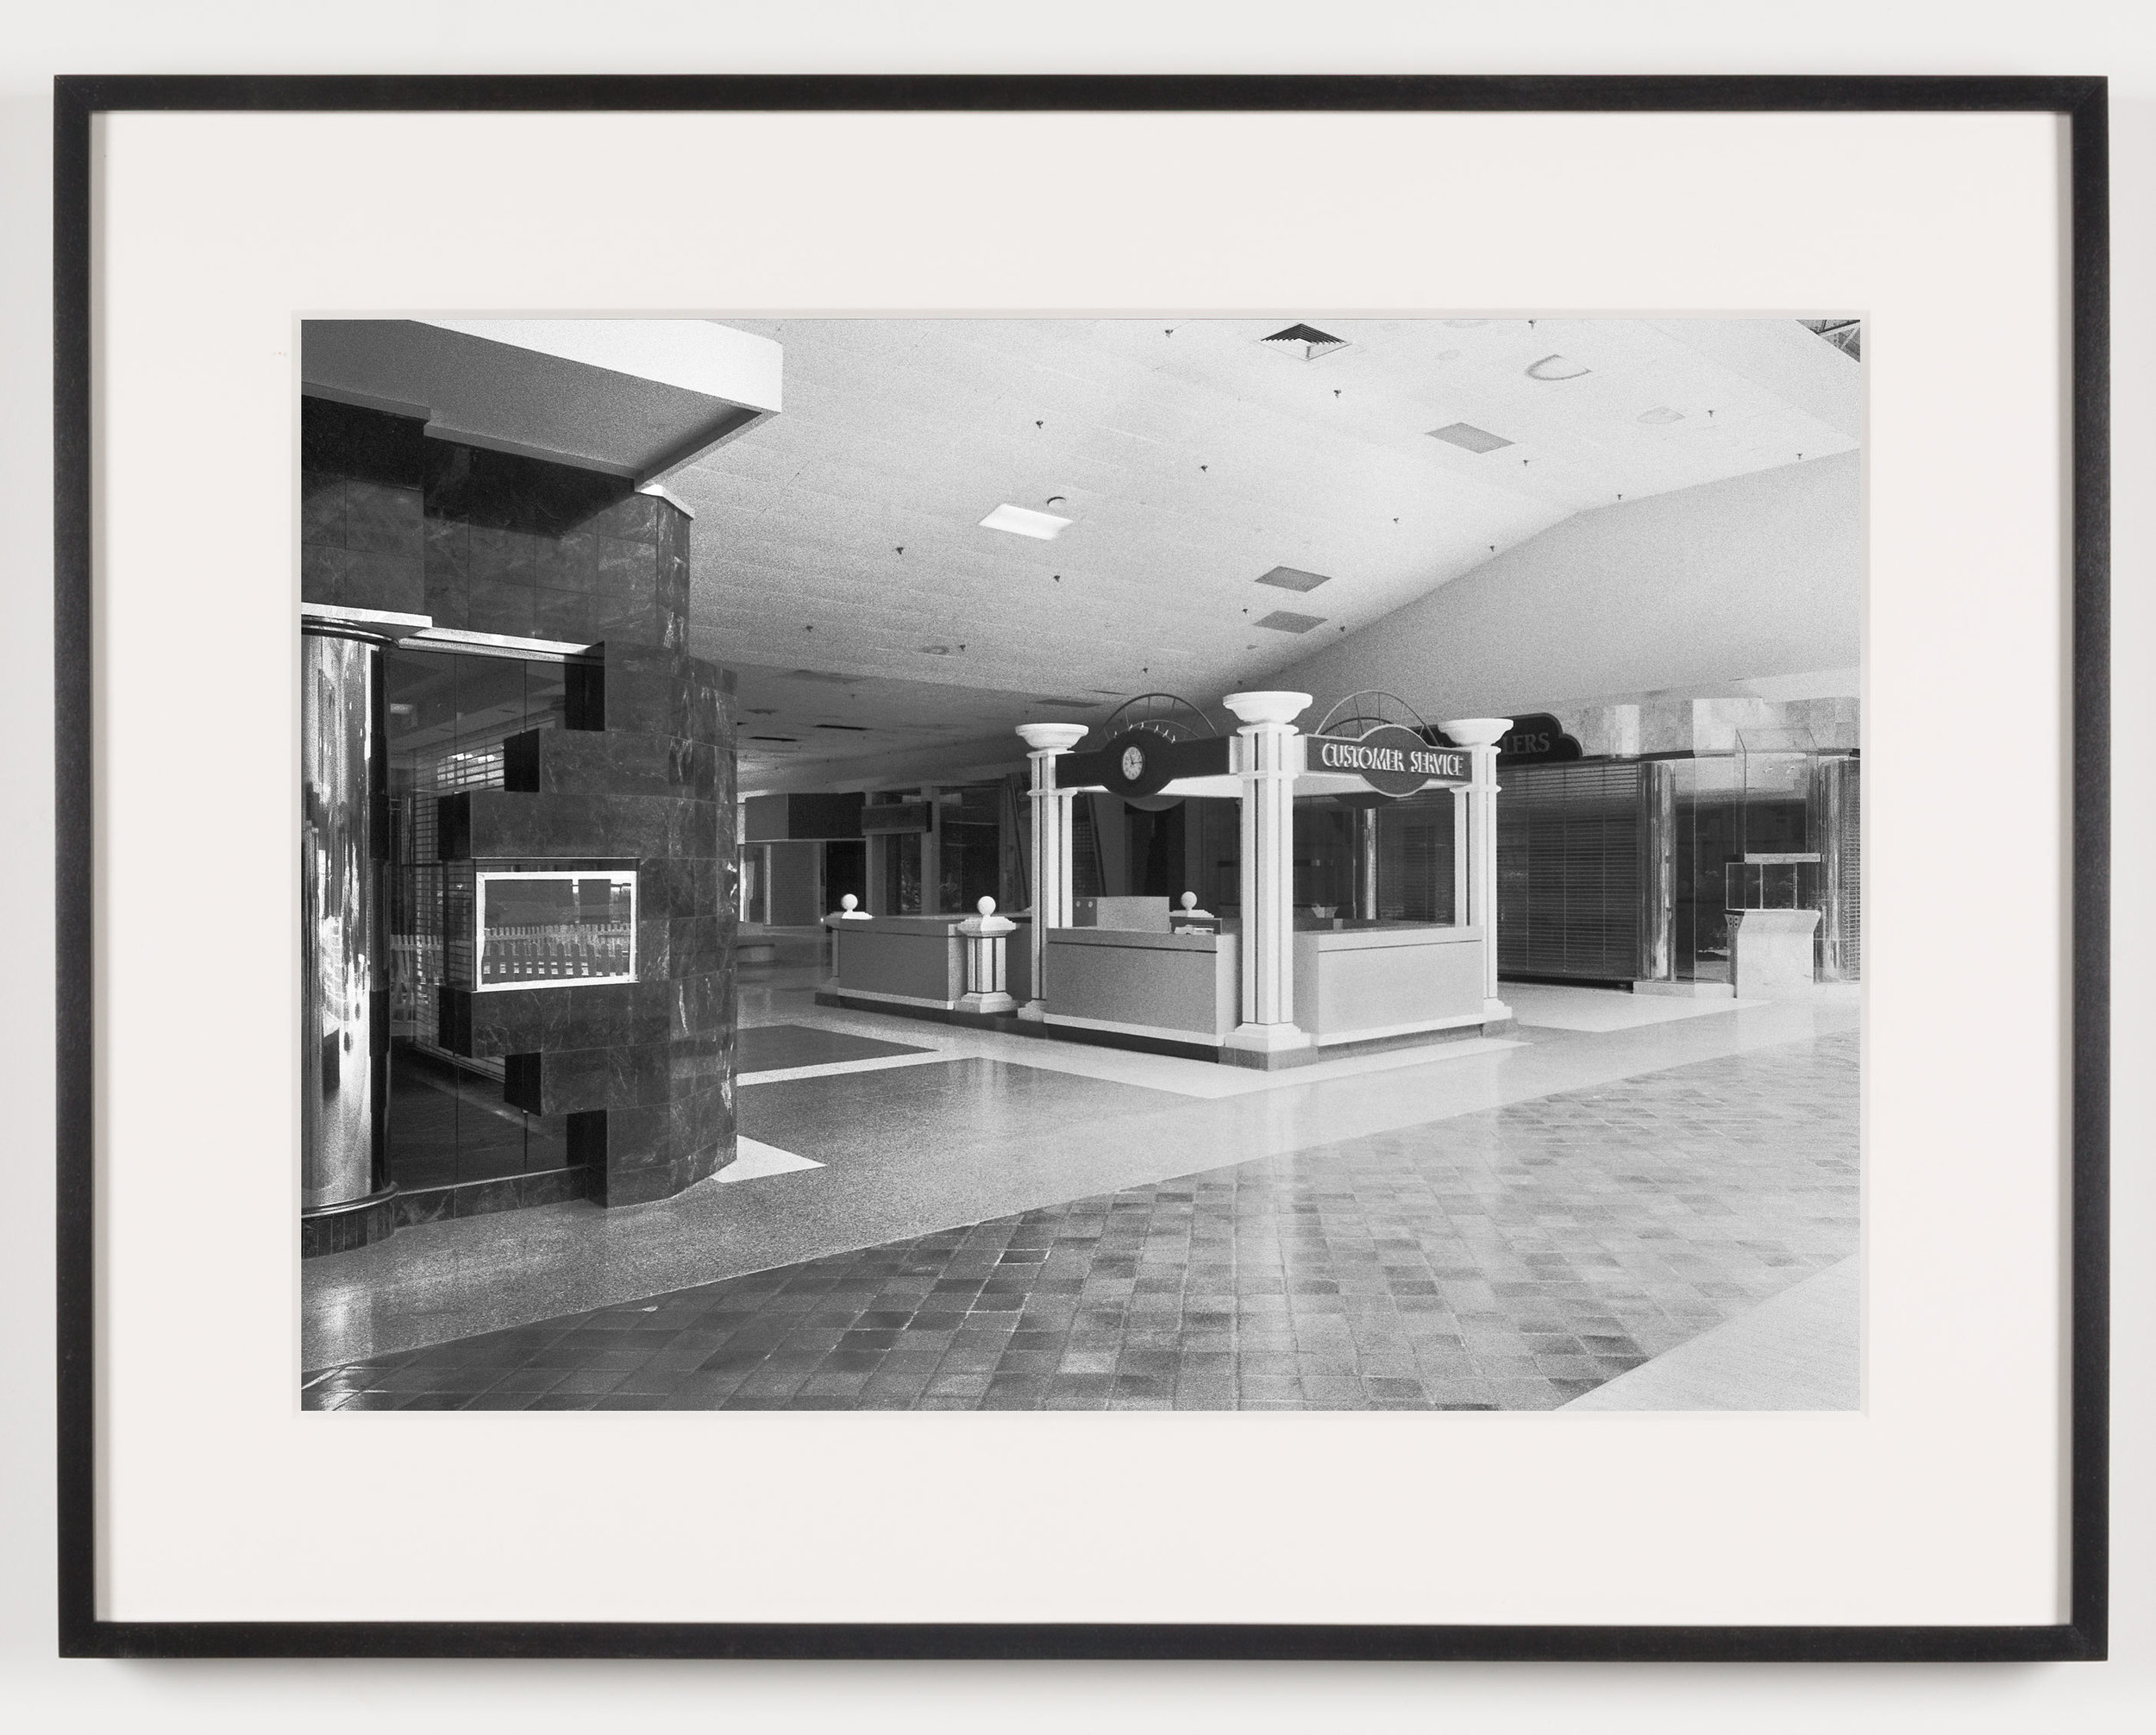   Rolling Acres Mall (View of Customer Service Kiosk), Akron, OH, Est. 1975   2011  Epson Ultrachrome K3 archival ink jet print on Hahnemühle Photo Rag paper  21 5/8 x 28 1/8 inches   American Passages, 2001–2011    A Diagram of Forces, 2011     